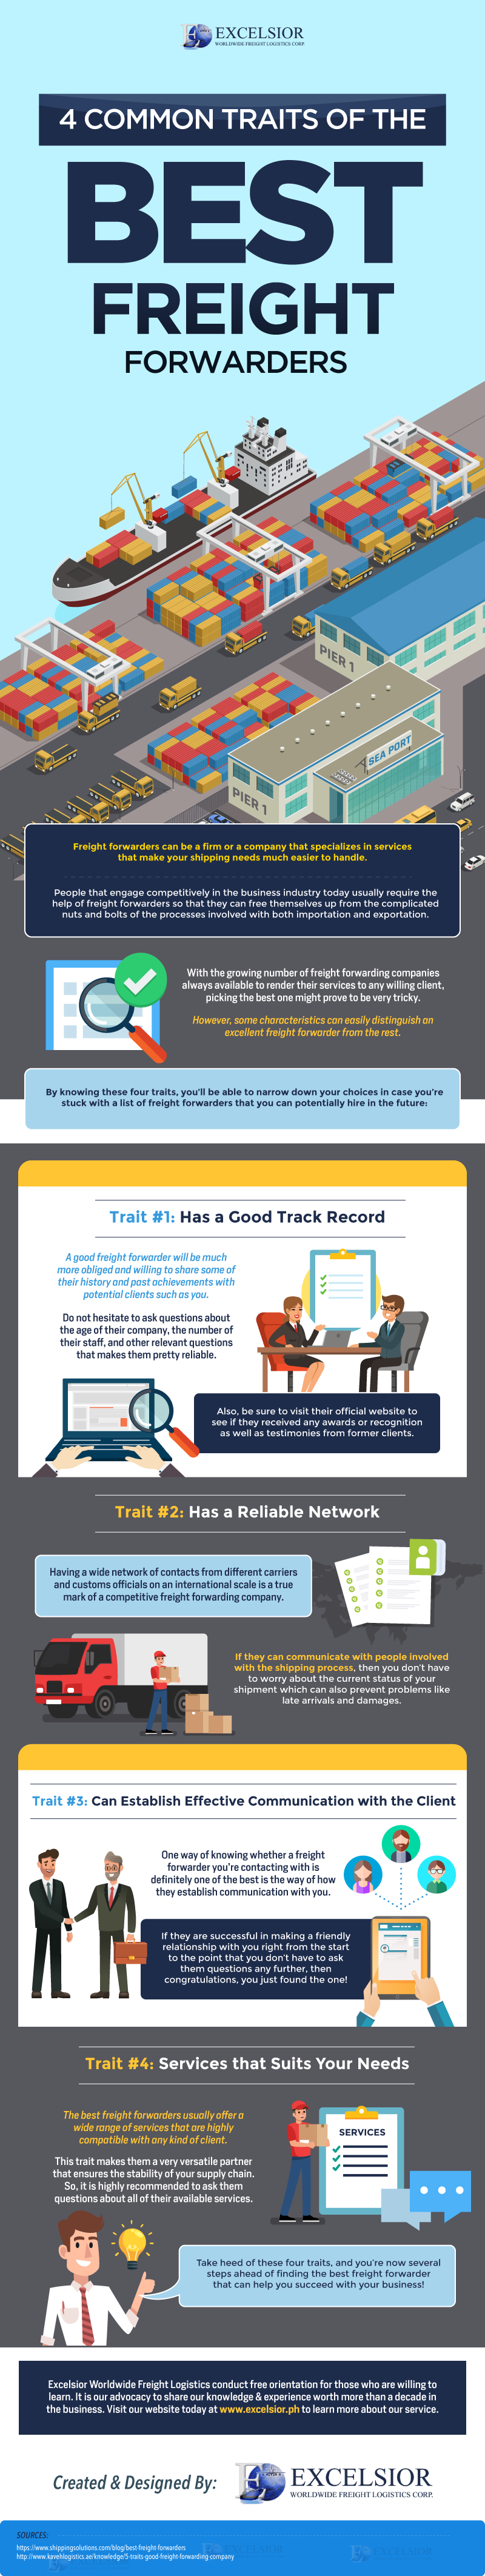 4 Common Traits of the Best Freight Forwarders - Infographic